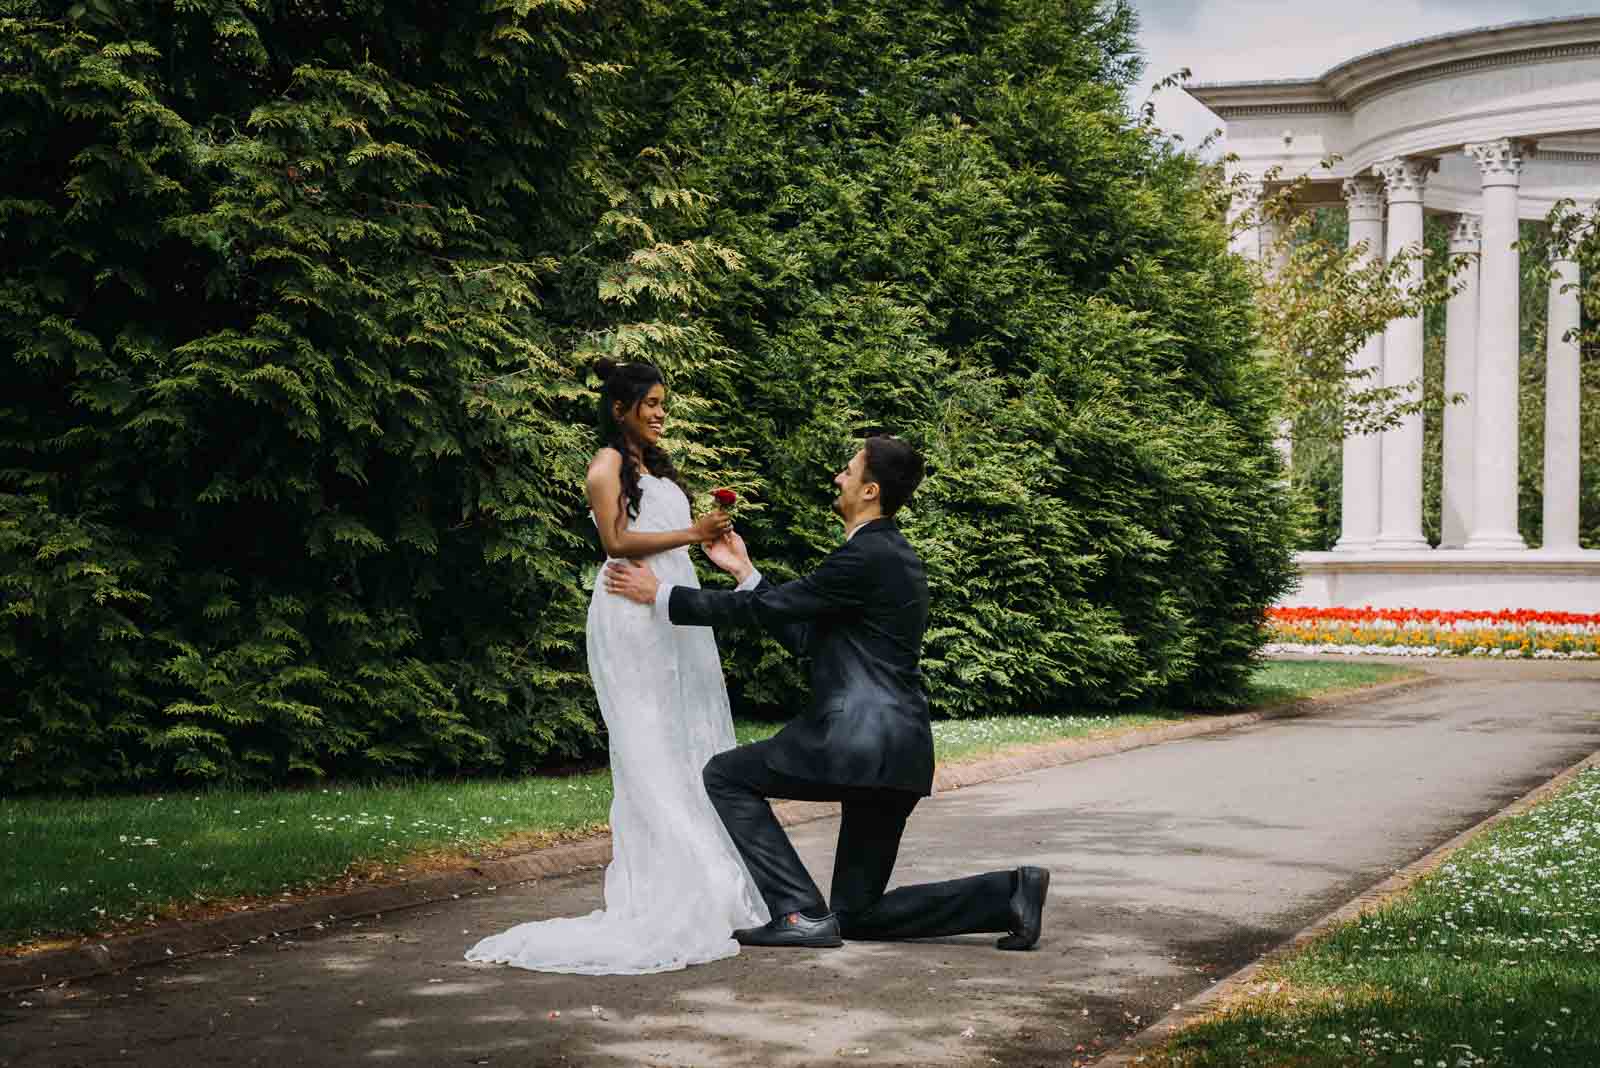 groom kneels on one knee in front of a happy bride in wales - micro wedding photography